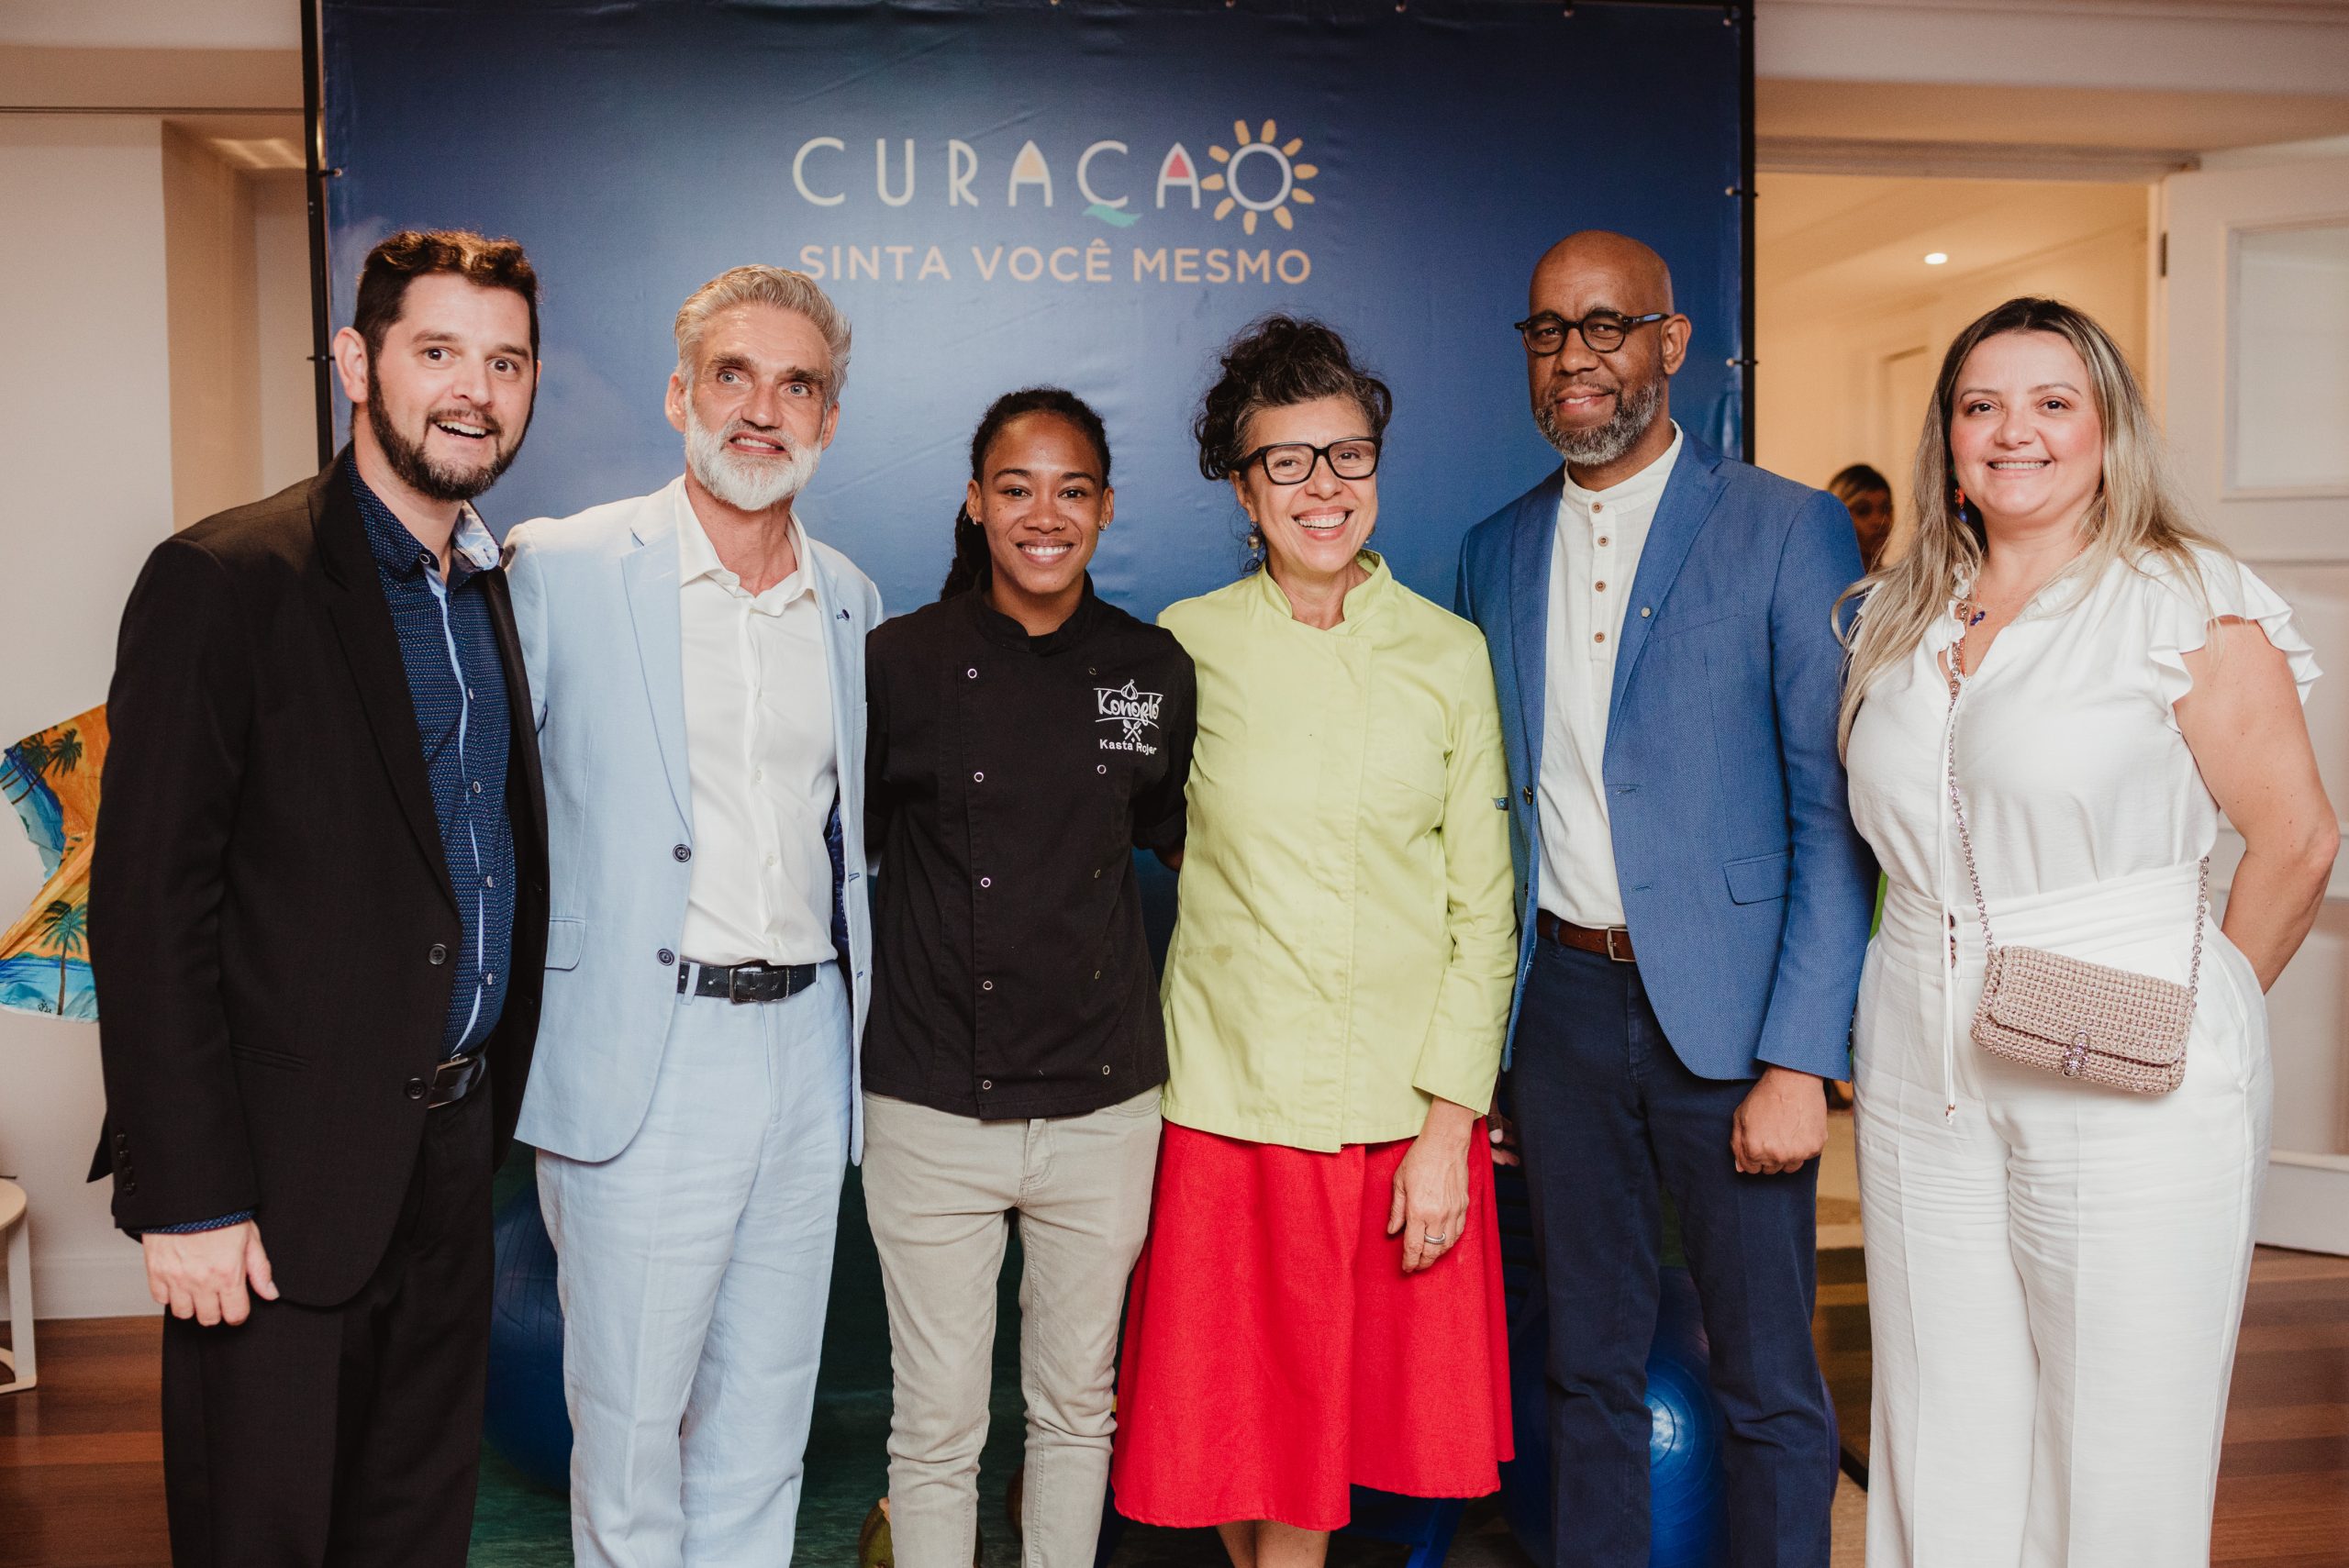 Curaçao held a special event with the Consulate General of the Netherlands in Rio de Janeiro, Brazil